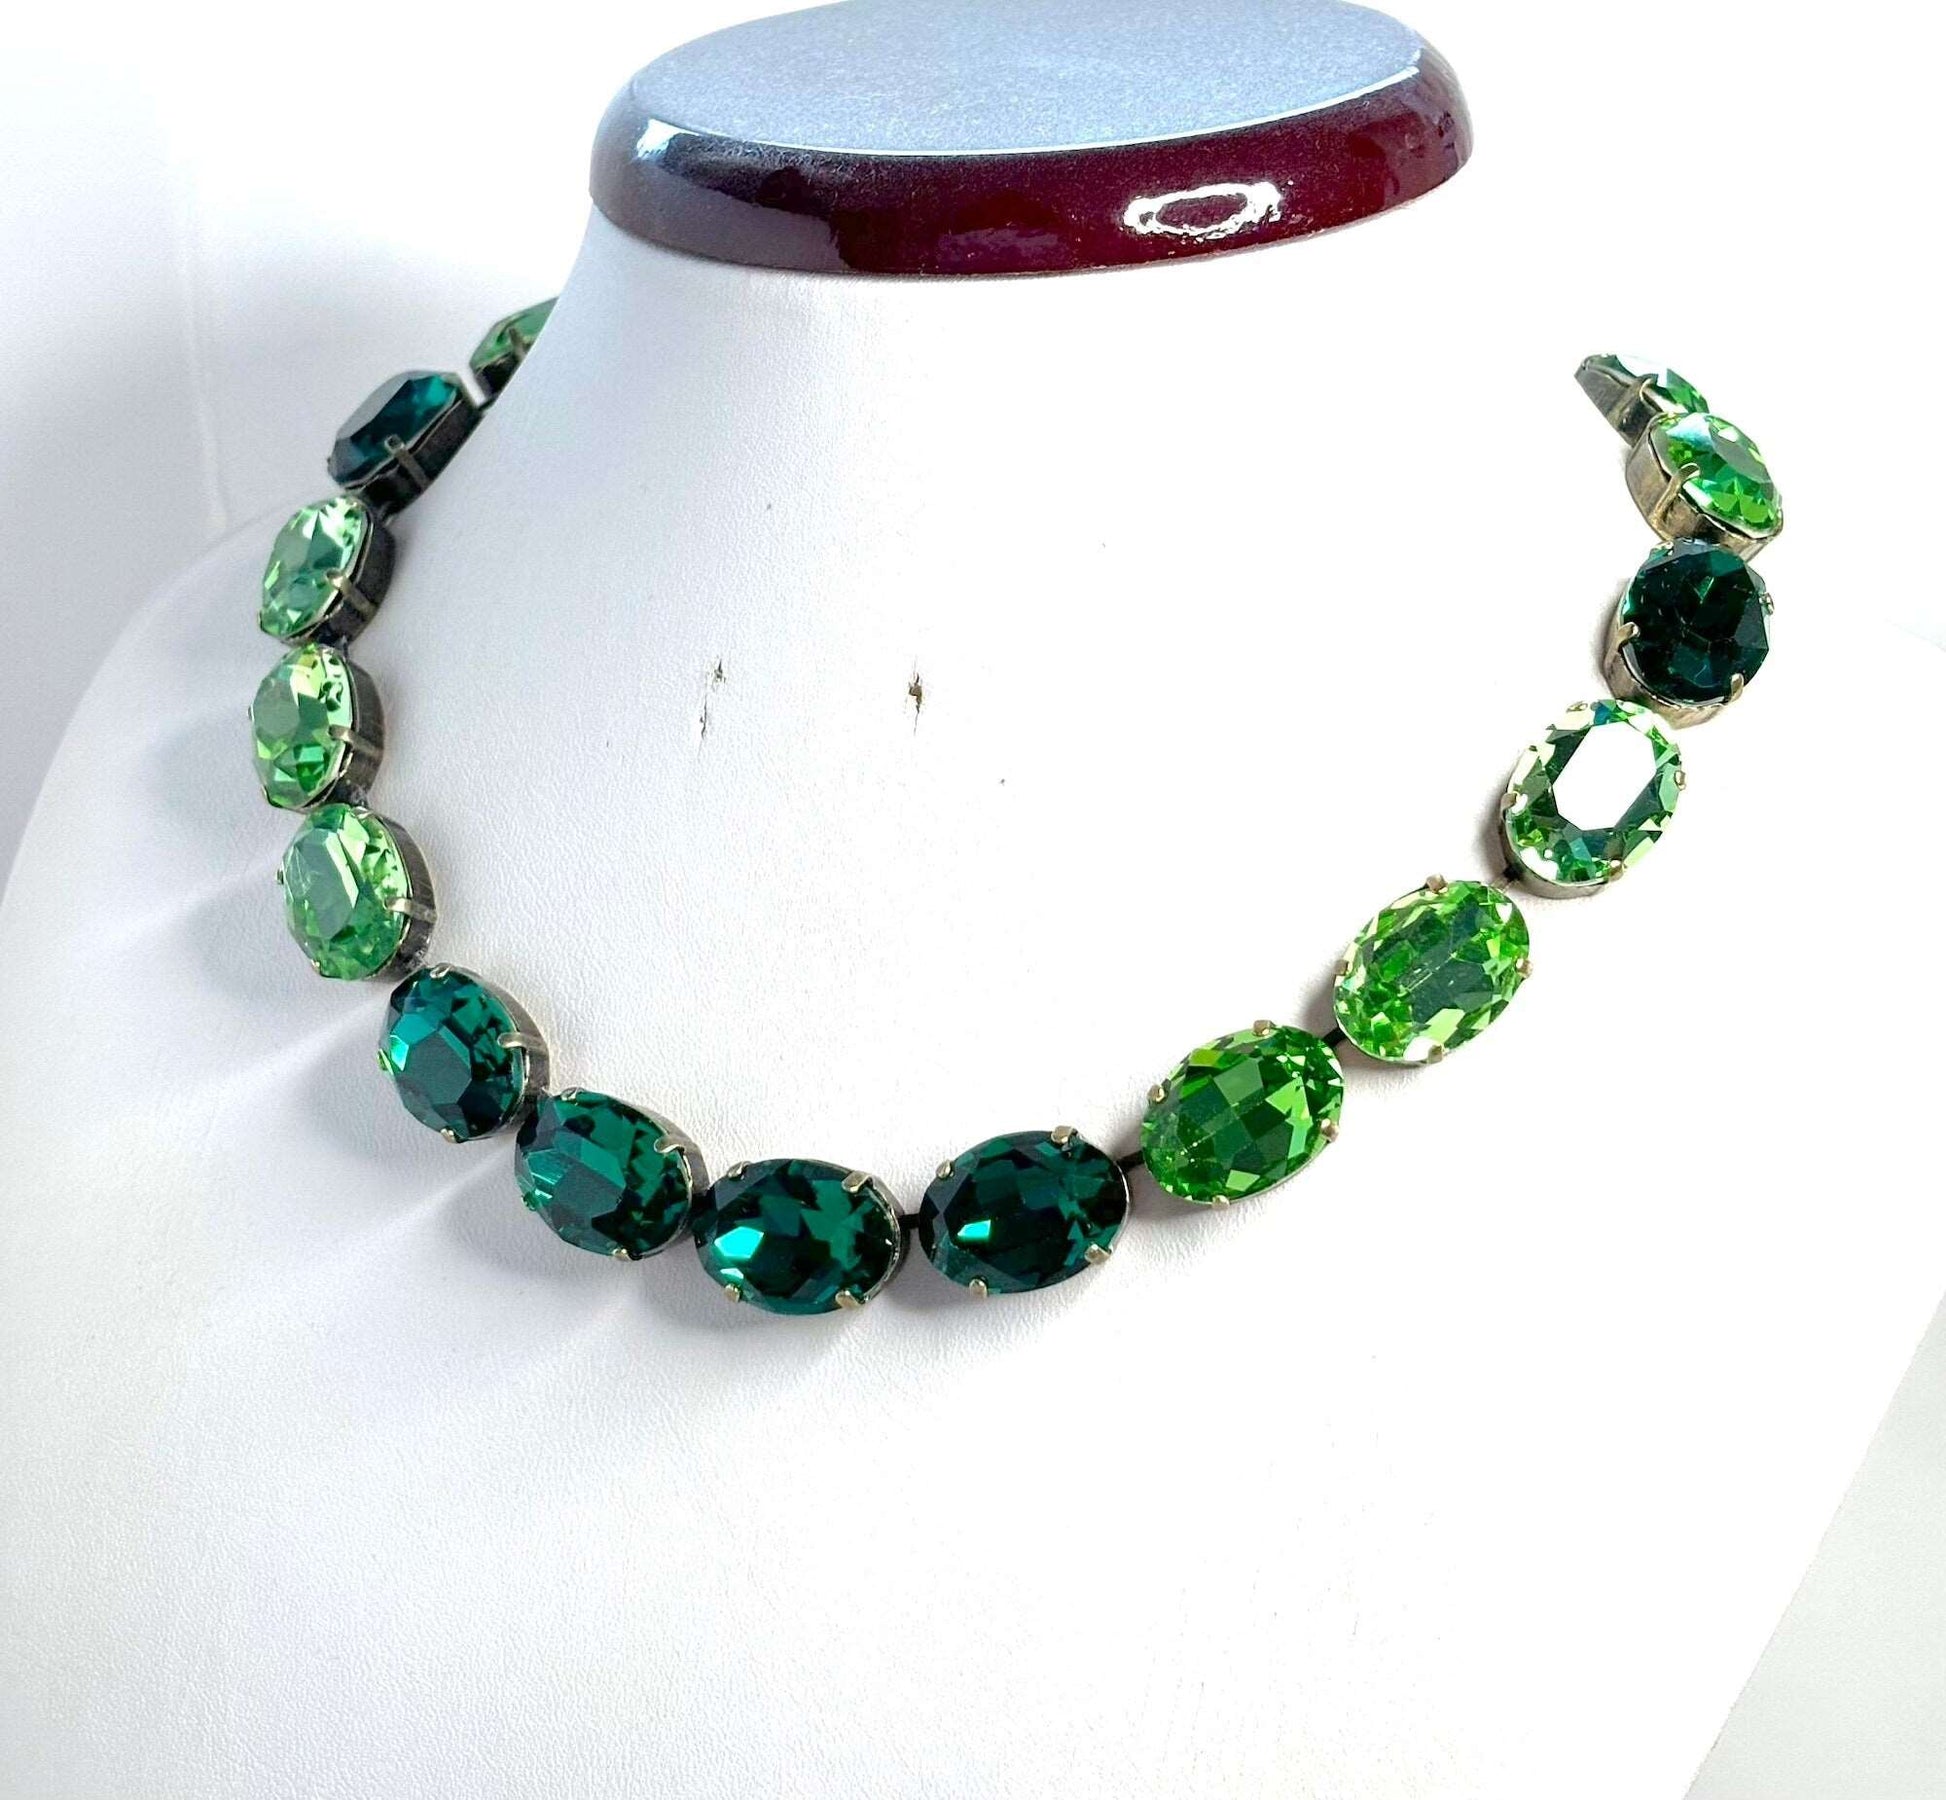 Peridot Emerald Crystal Georgian Collet Necklace, Anna Wintour Style, Green Crystal Choker, Riviere Necklace, Statement Necklace for Women